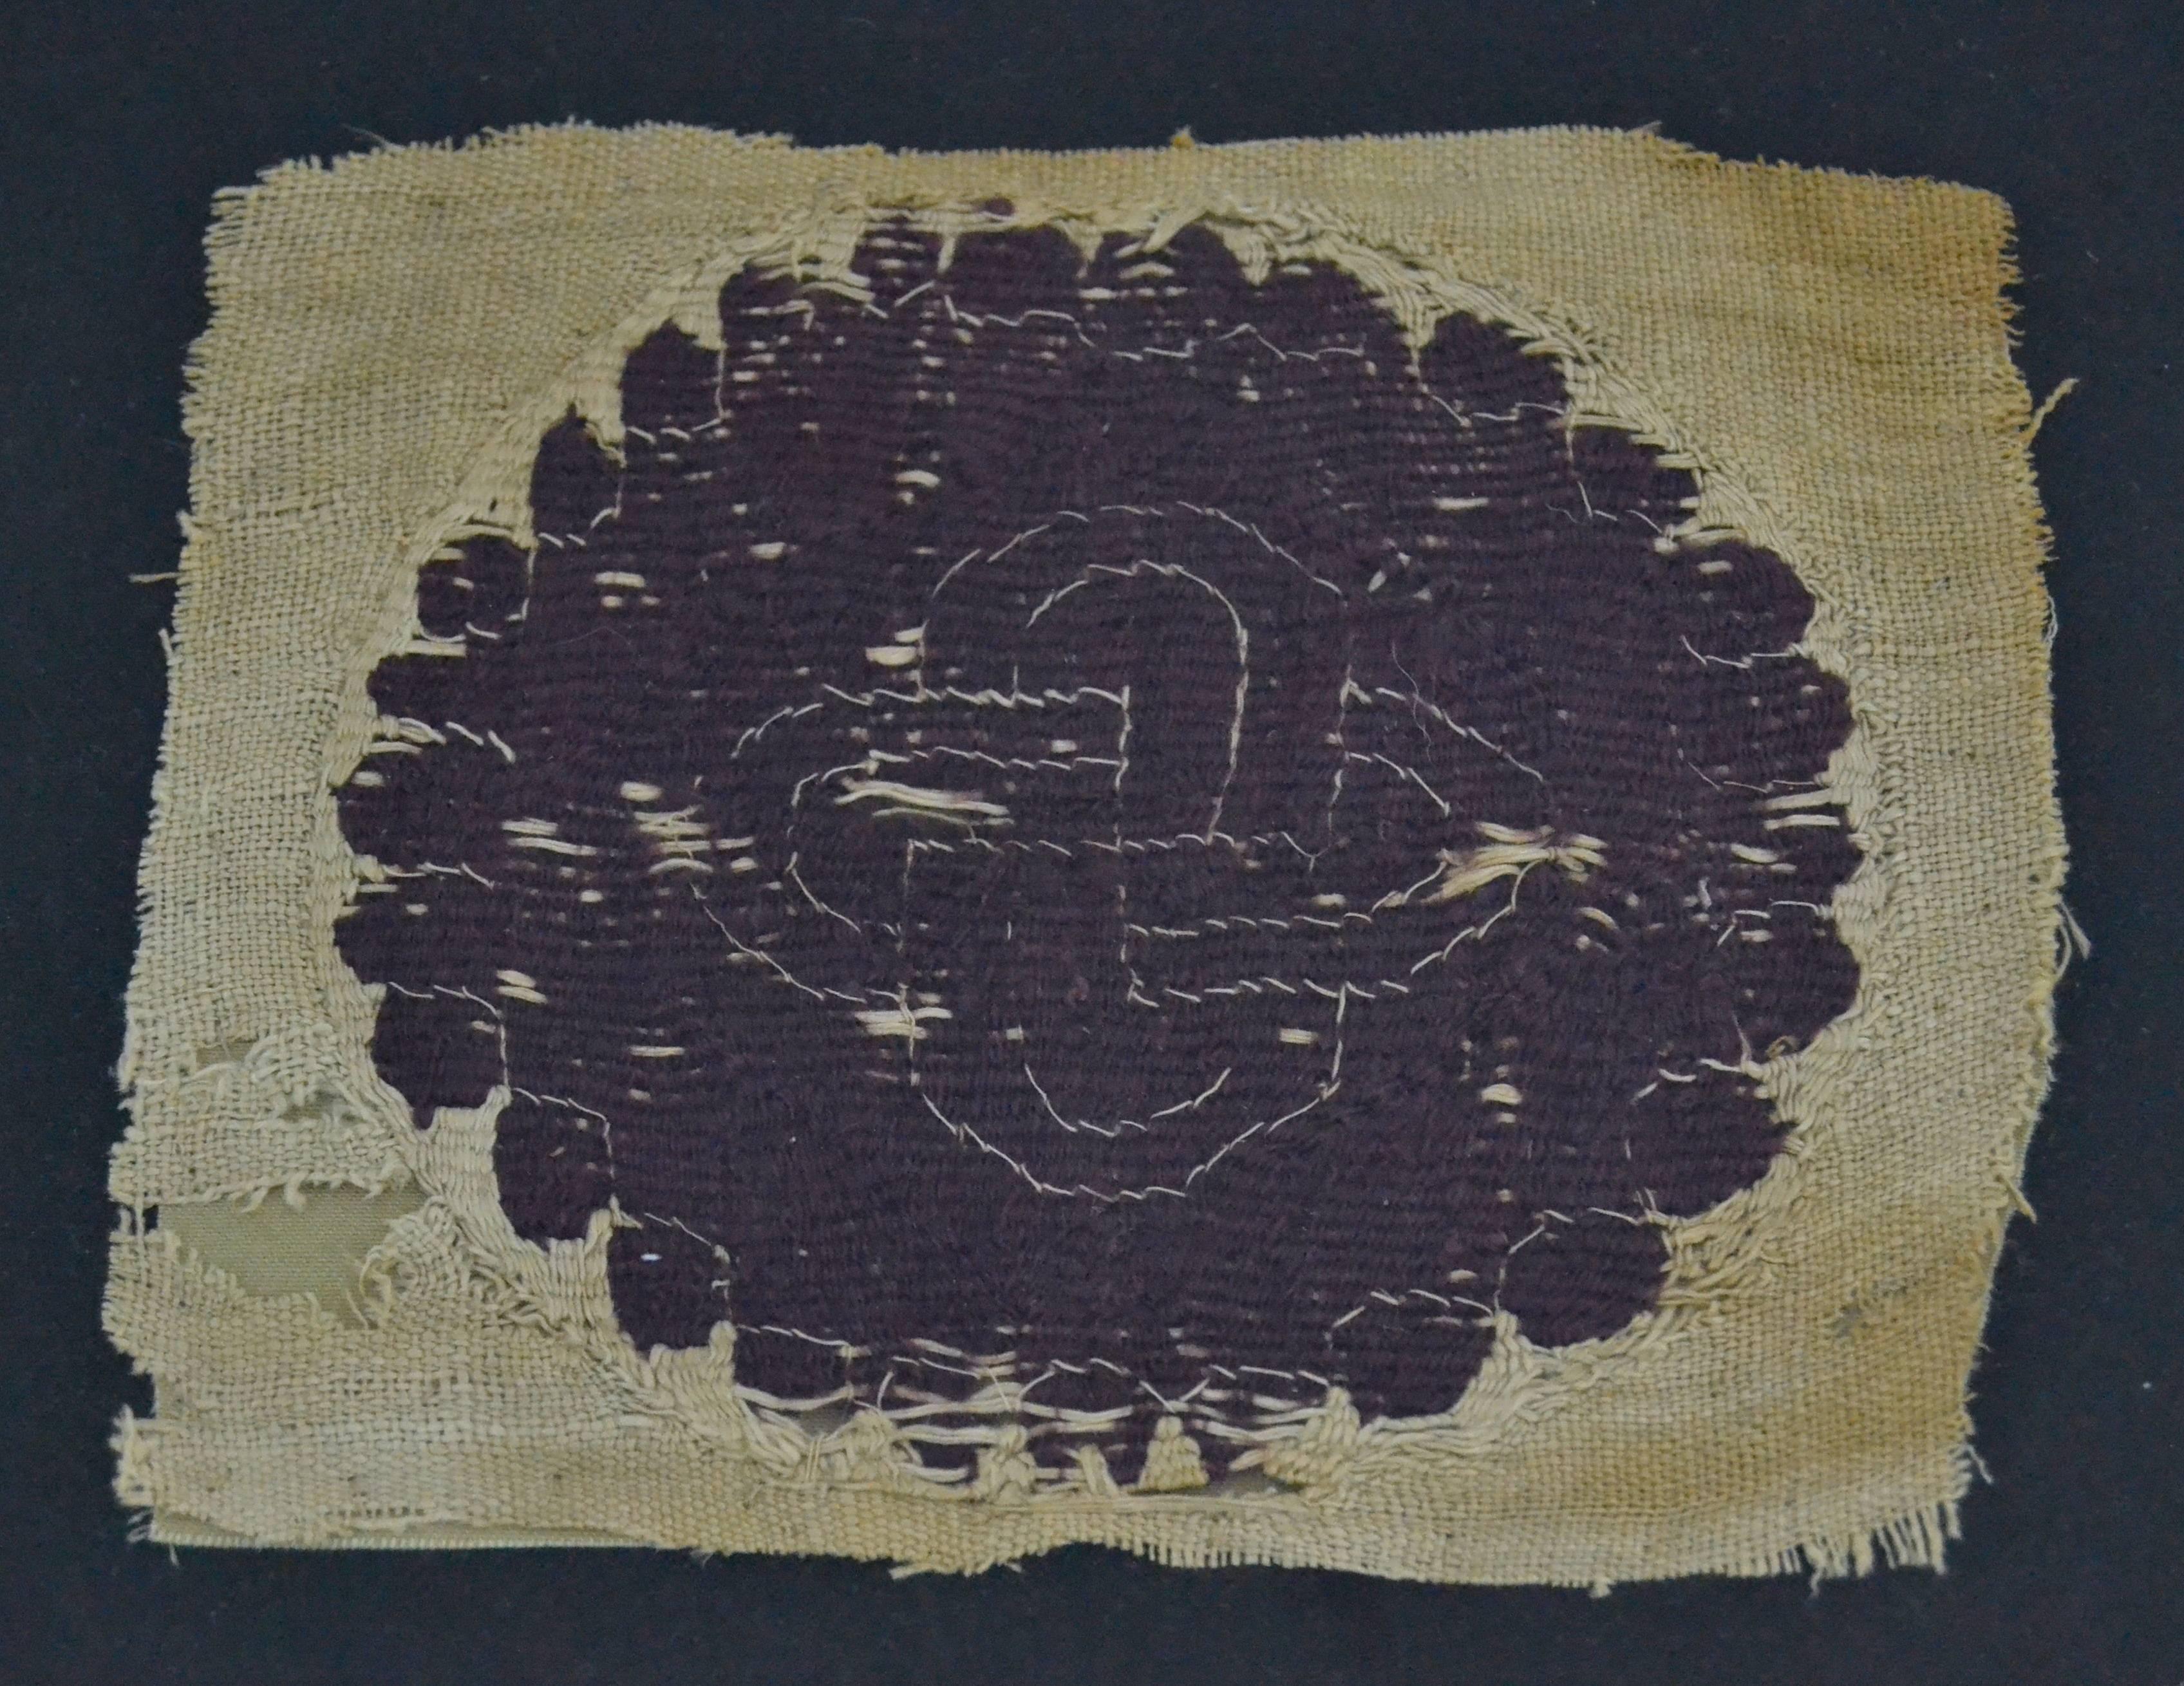 Coptic roundel of a Herakles knot, plain woven linen with tapestry inserts. the fragment is mounted on linen and in a plexiglass box.